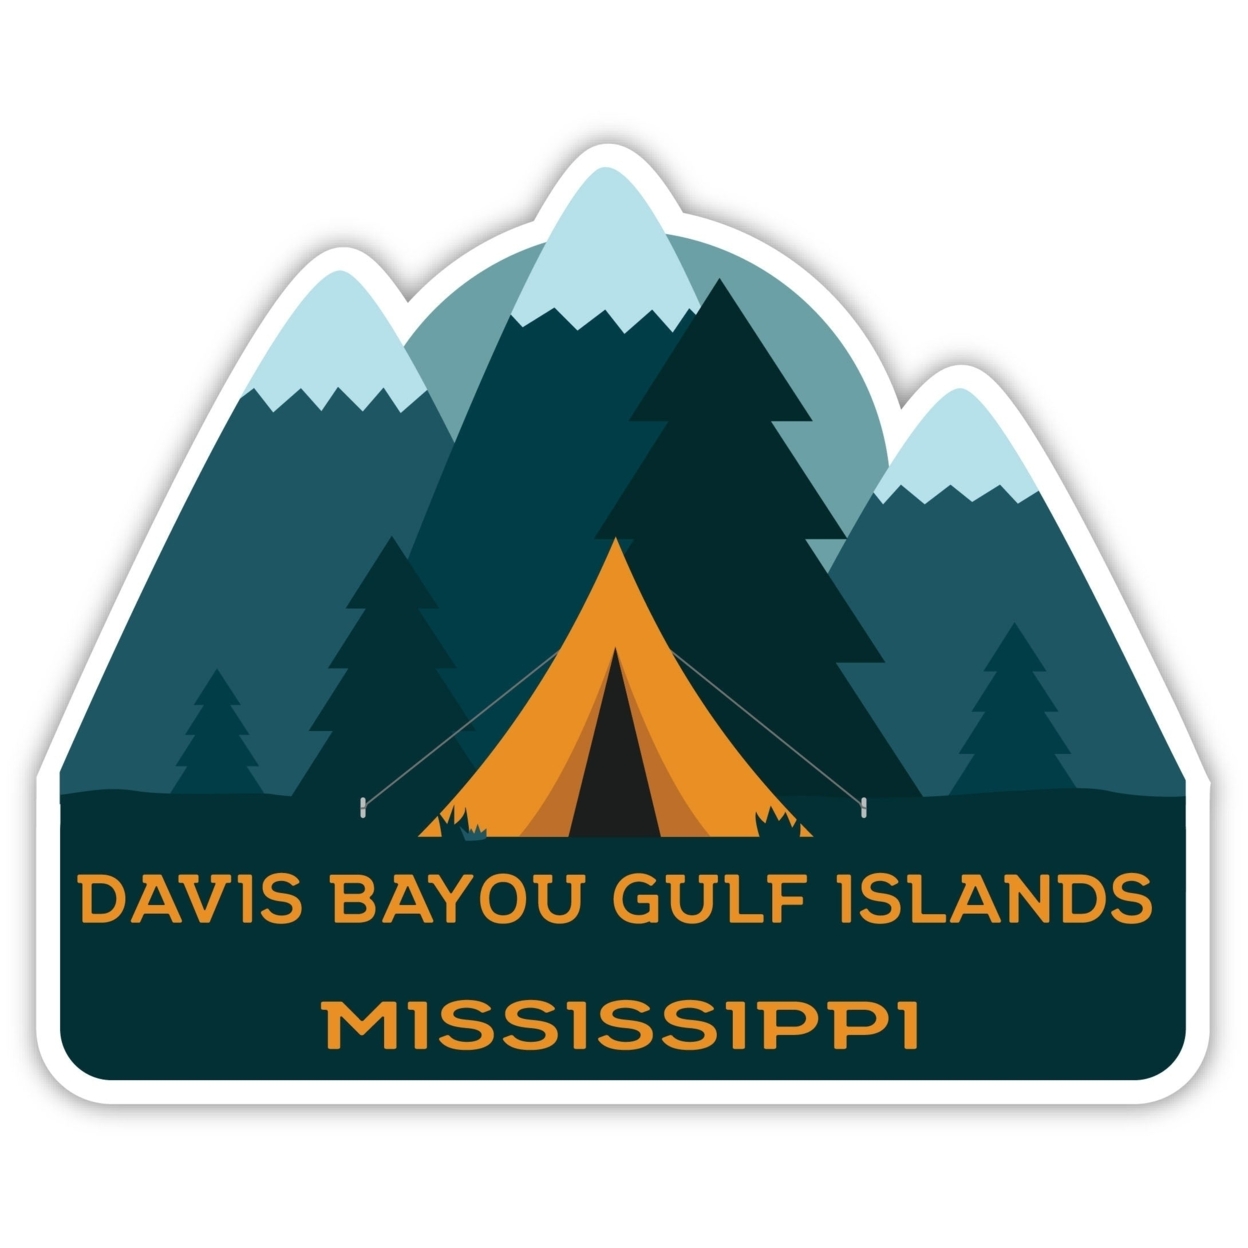 Davis Bayou Gulf Islands Mississippi Souvenir Decorative Stickers (Choose Theme And Size) - 4-Pack, 10-Inch, Tent